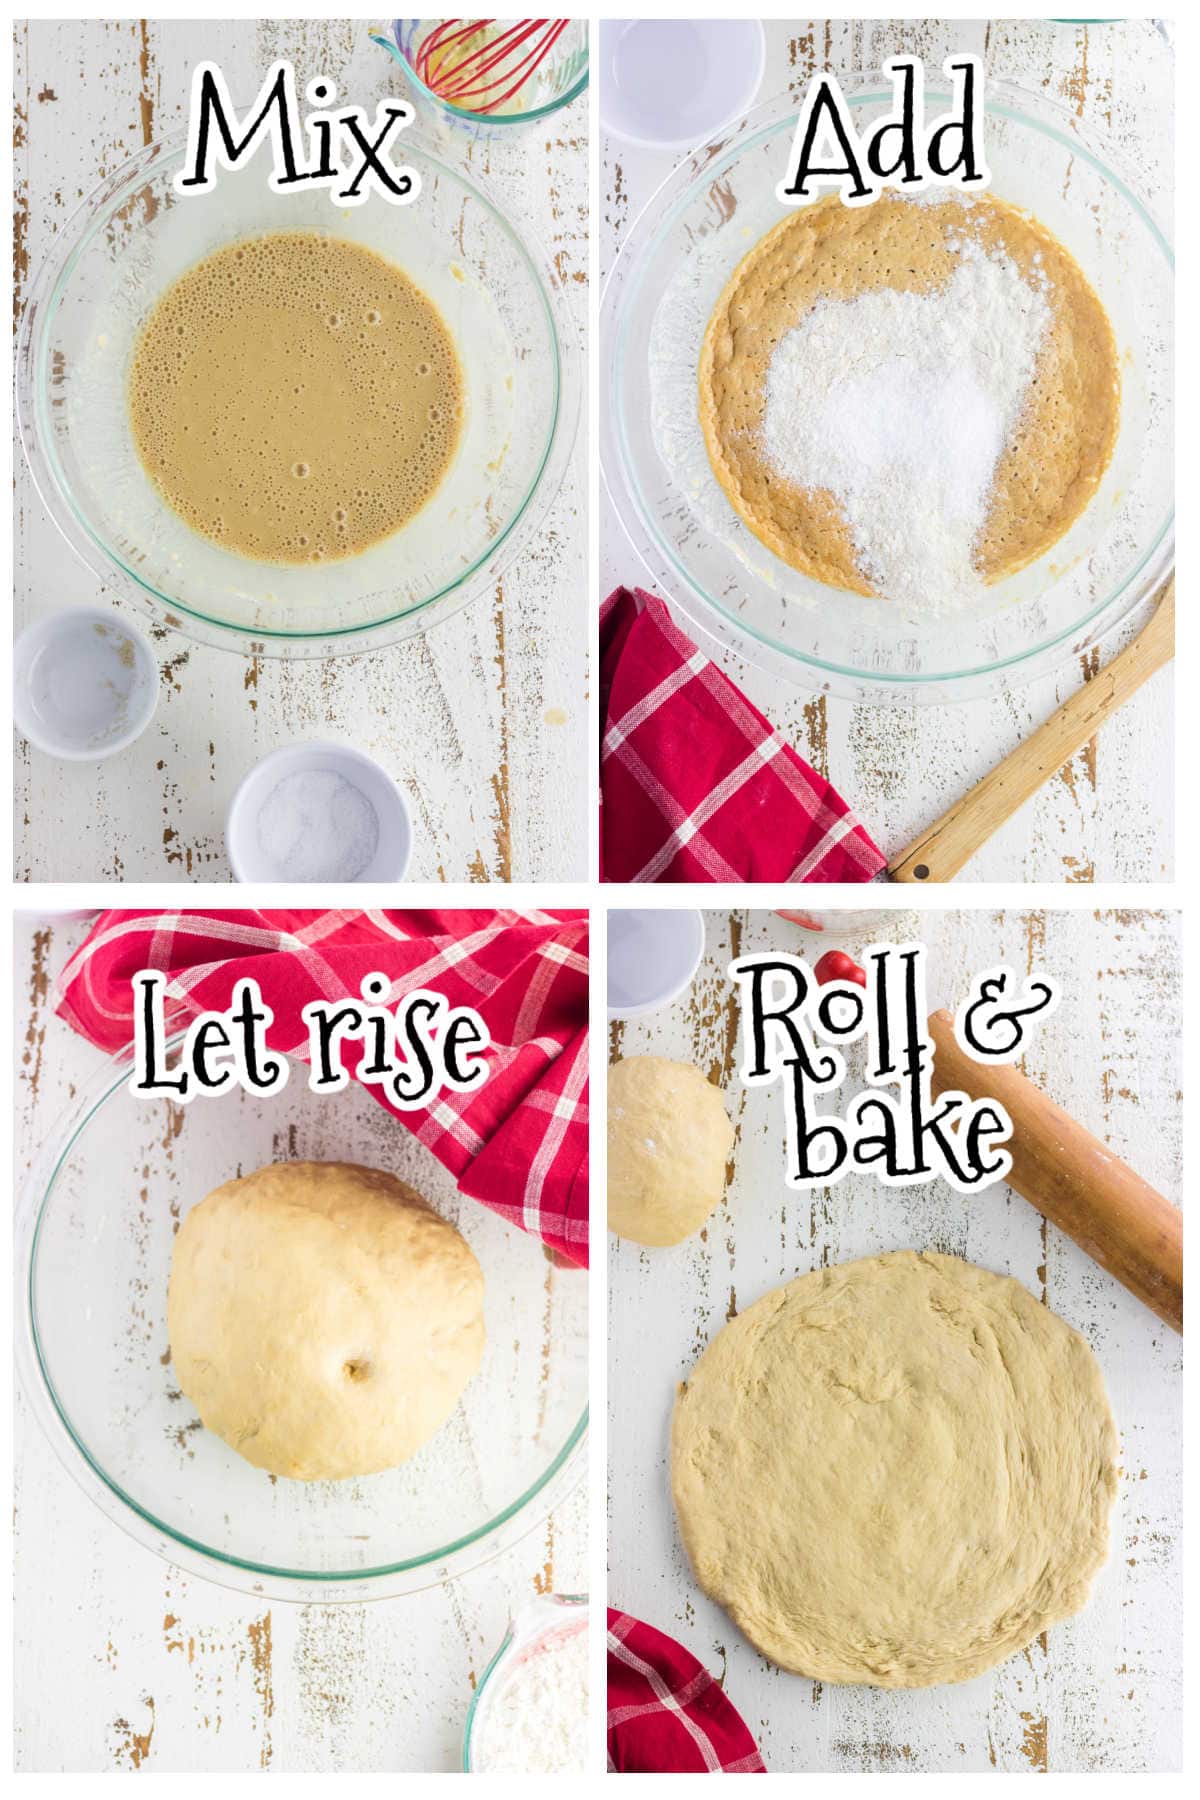 Step by step images showing how to make beer pizza dough.